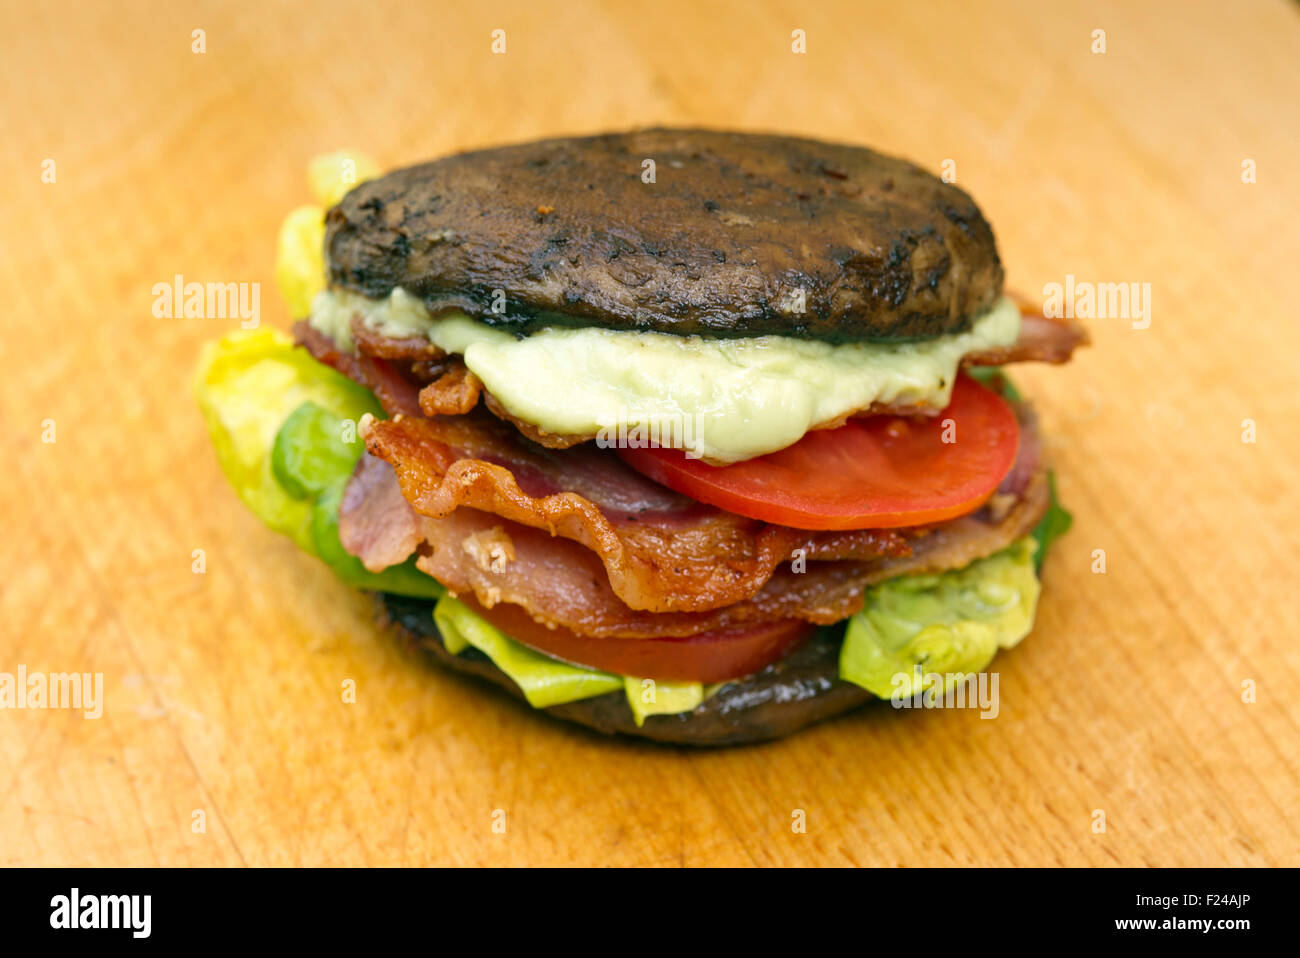 Paleo diet food, paleo bacon with lettuce and tomato sandwich, supposedly based on 'cave man' Palaeolithic food for health. a UK Stock Photo